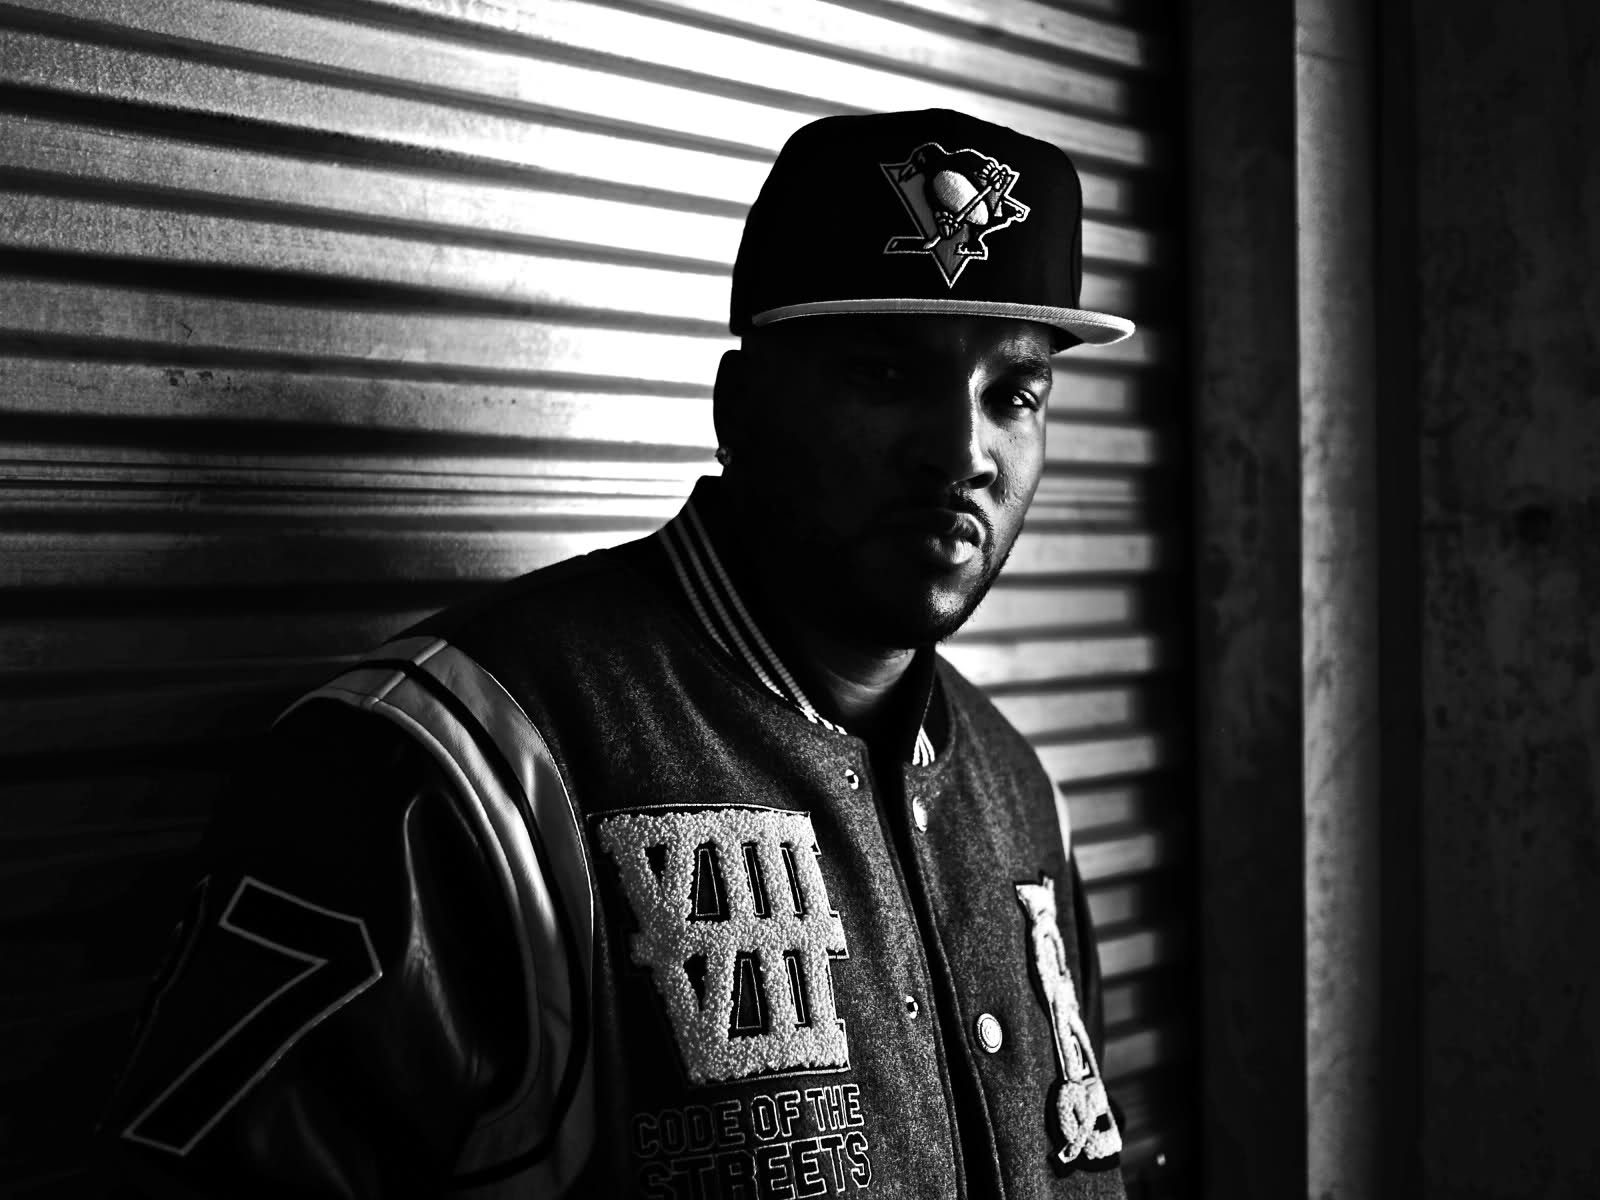 VIDEO: YOUNG JEEZY